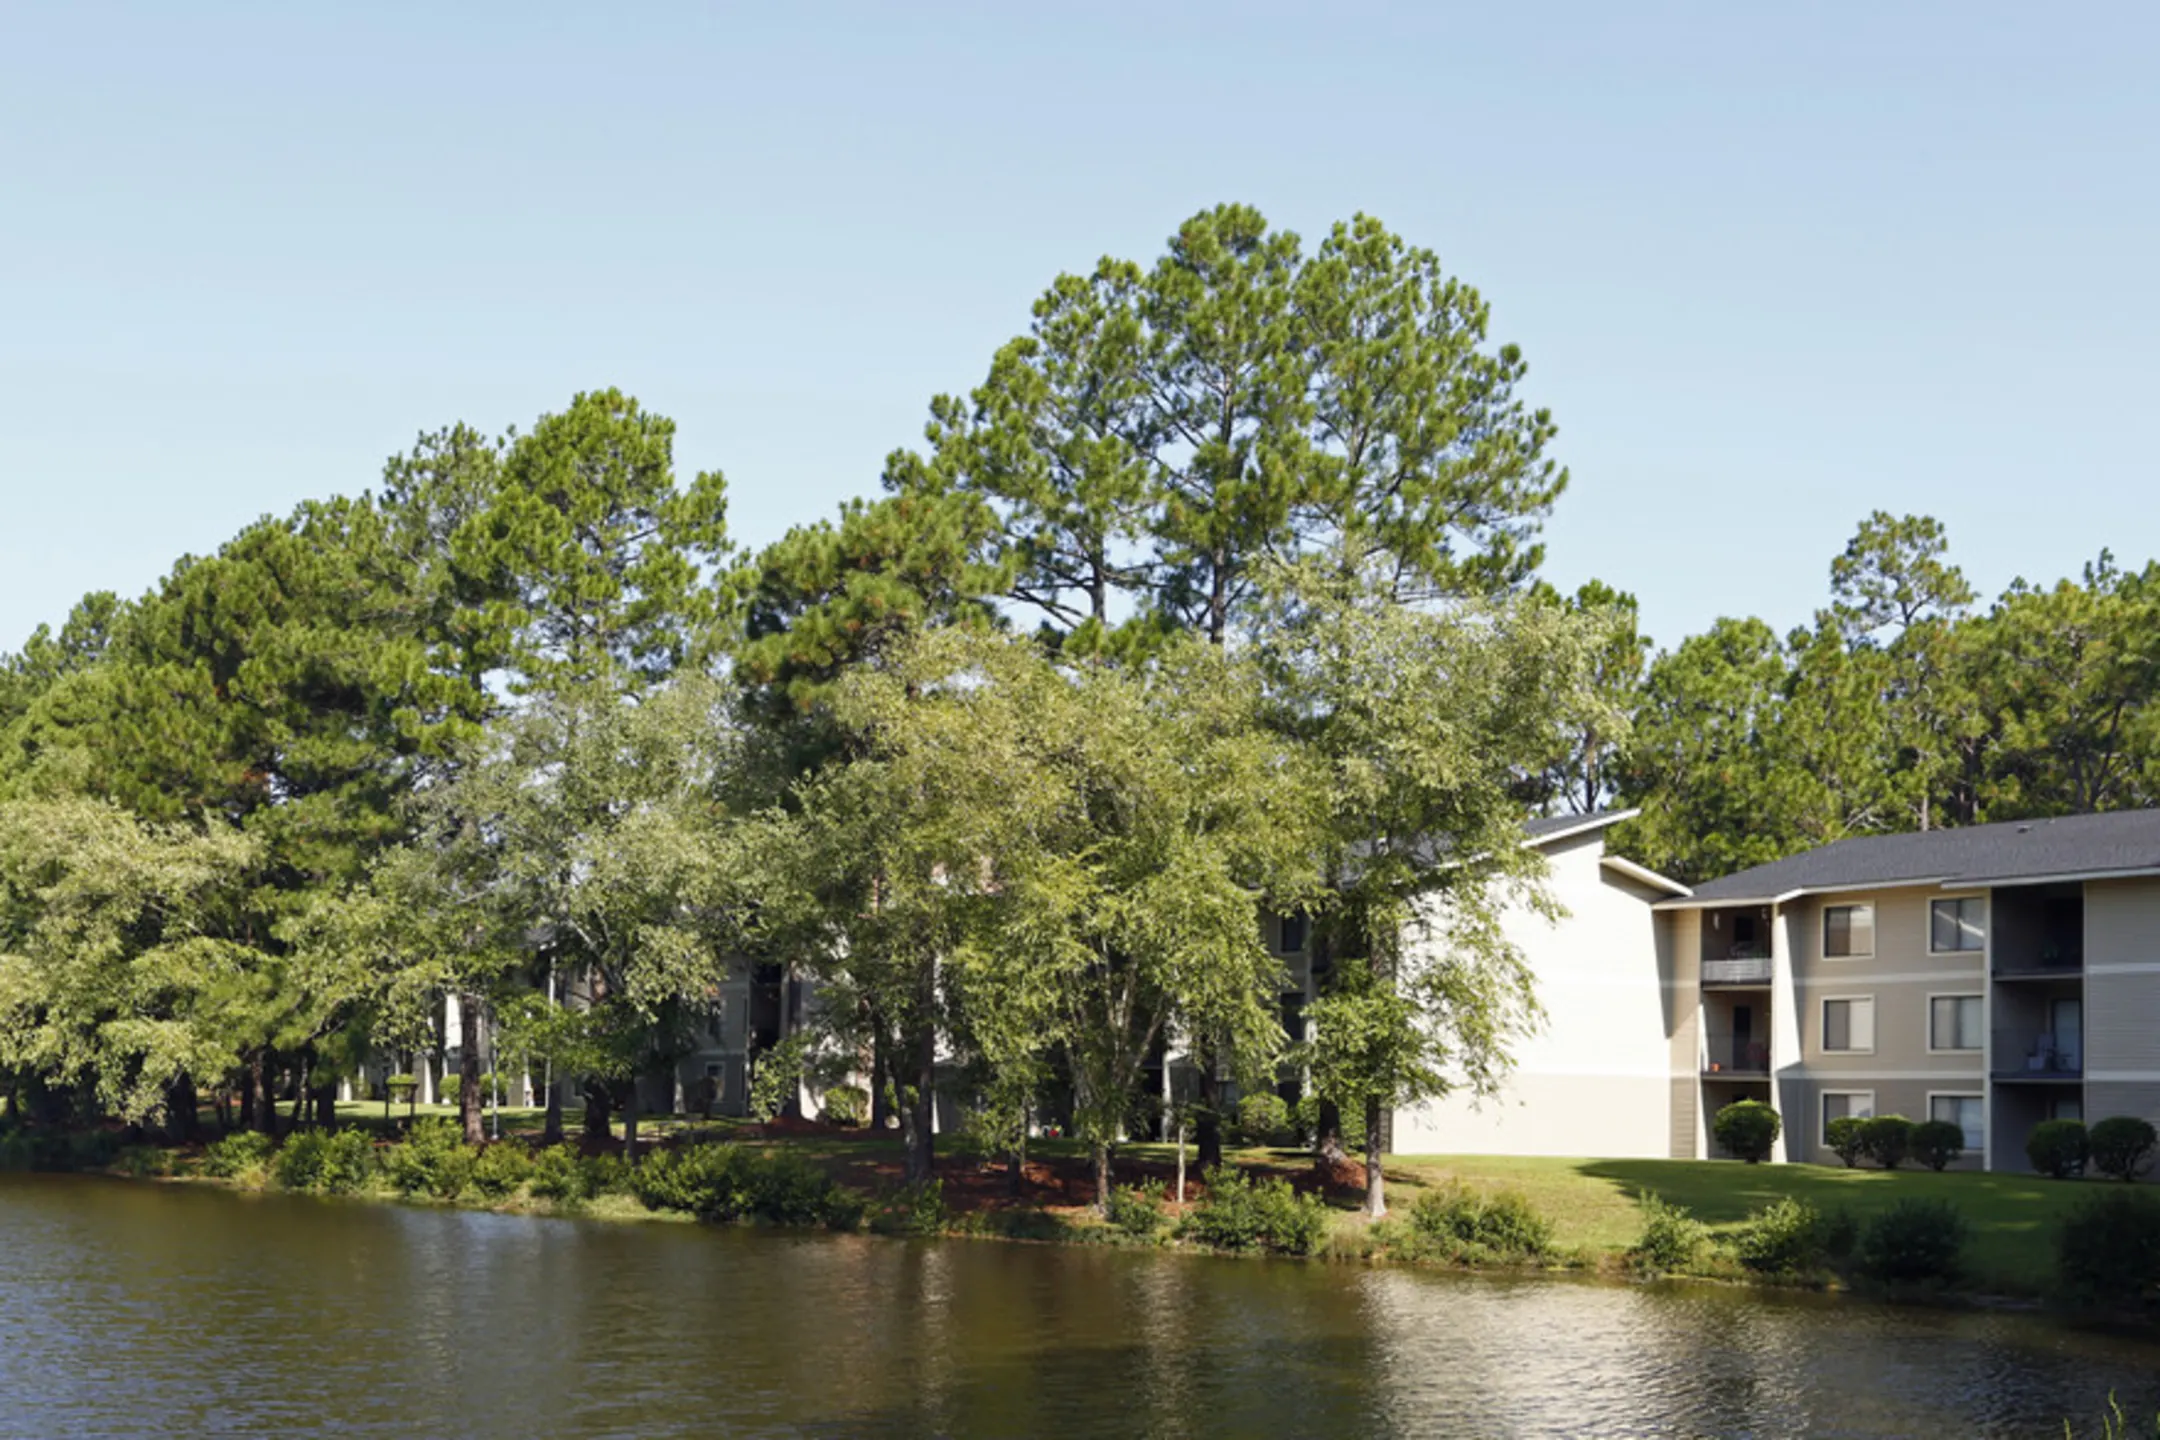 Building - Lake Clair Apartments - Fayetteville, NC